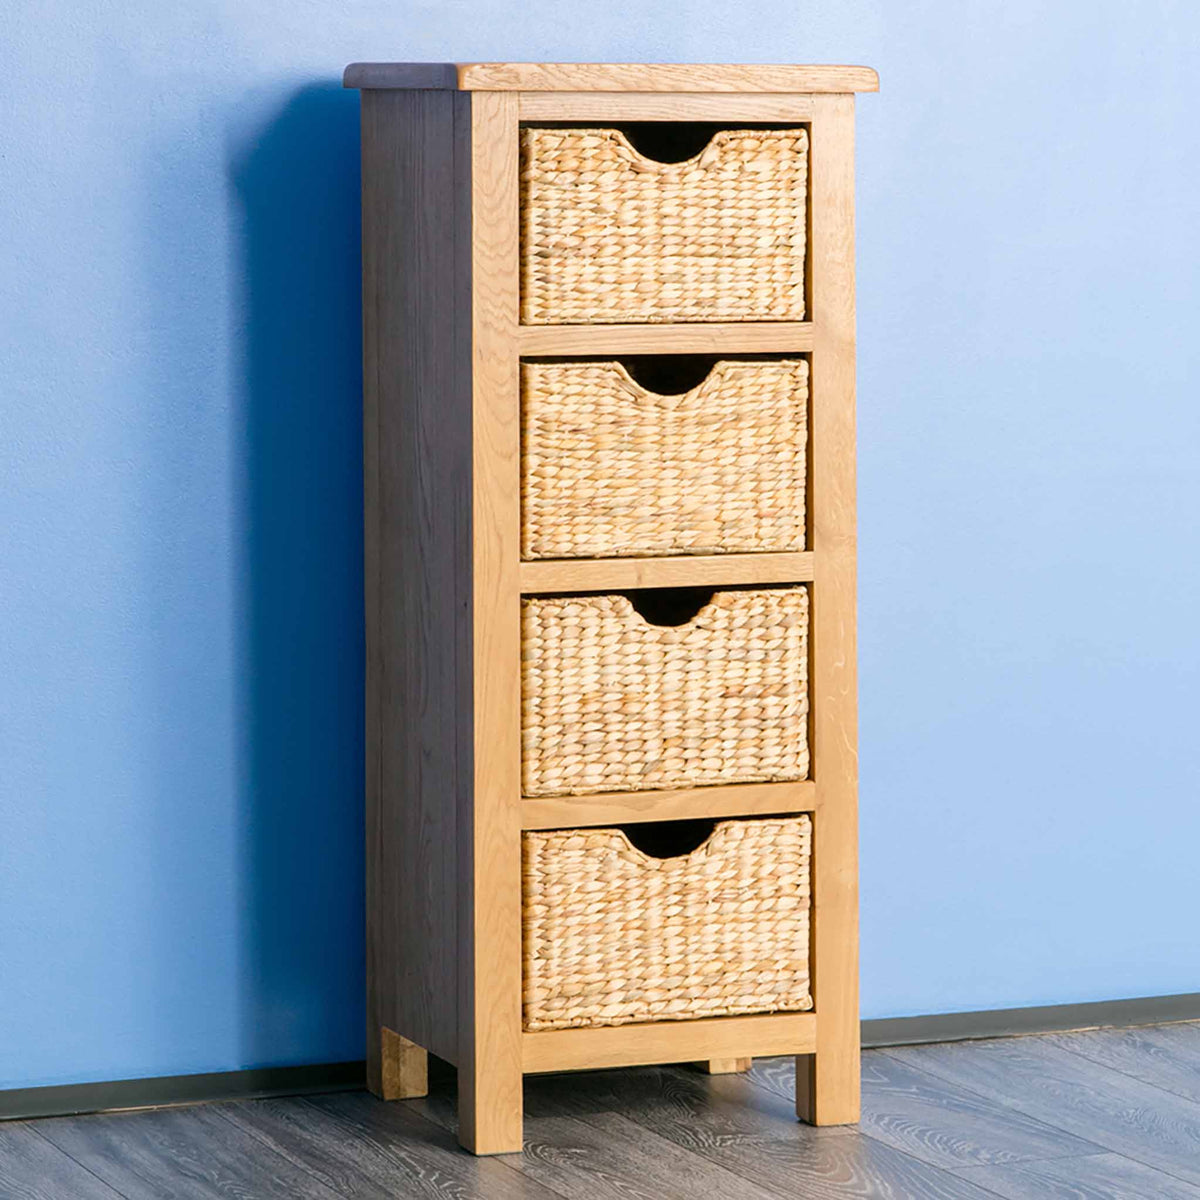 Surrey Oak Tallboy with Baskets - Lifestyle side view